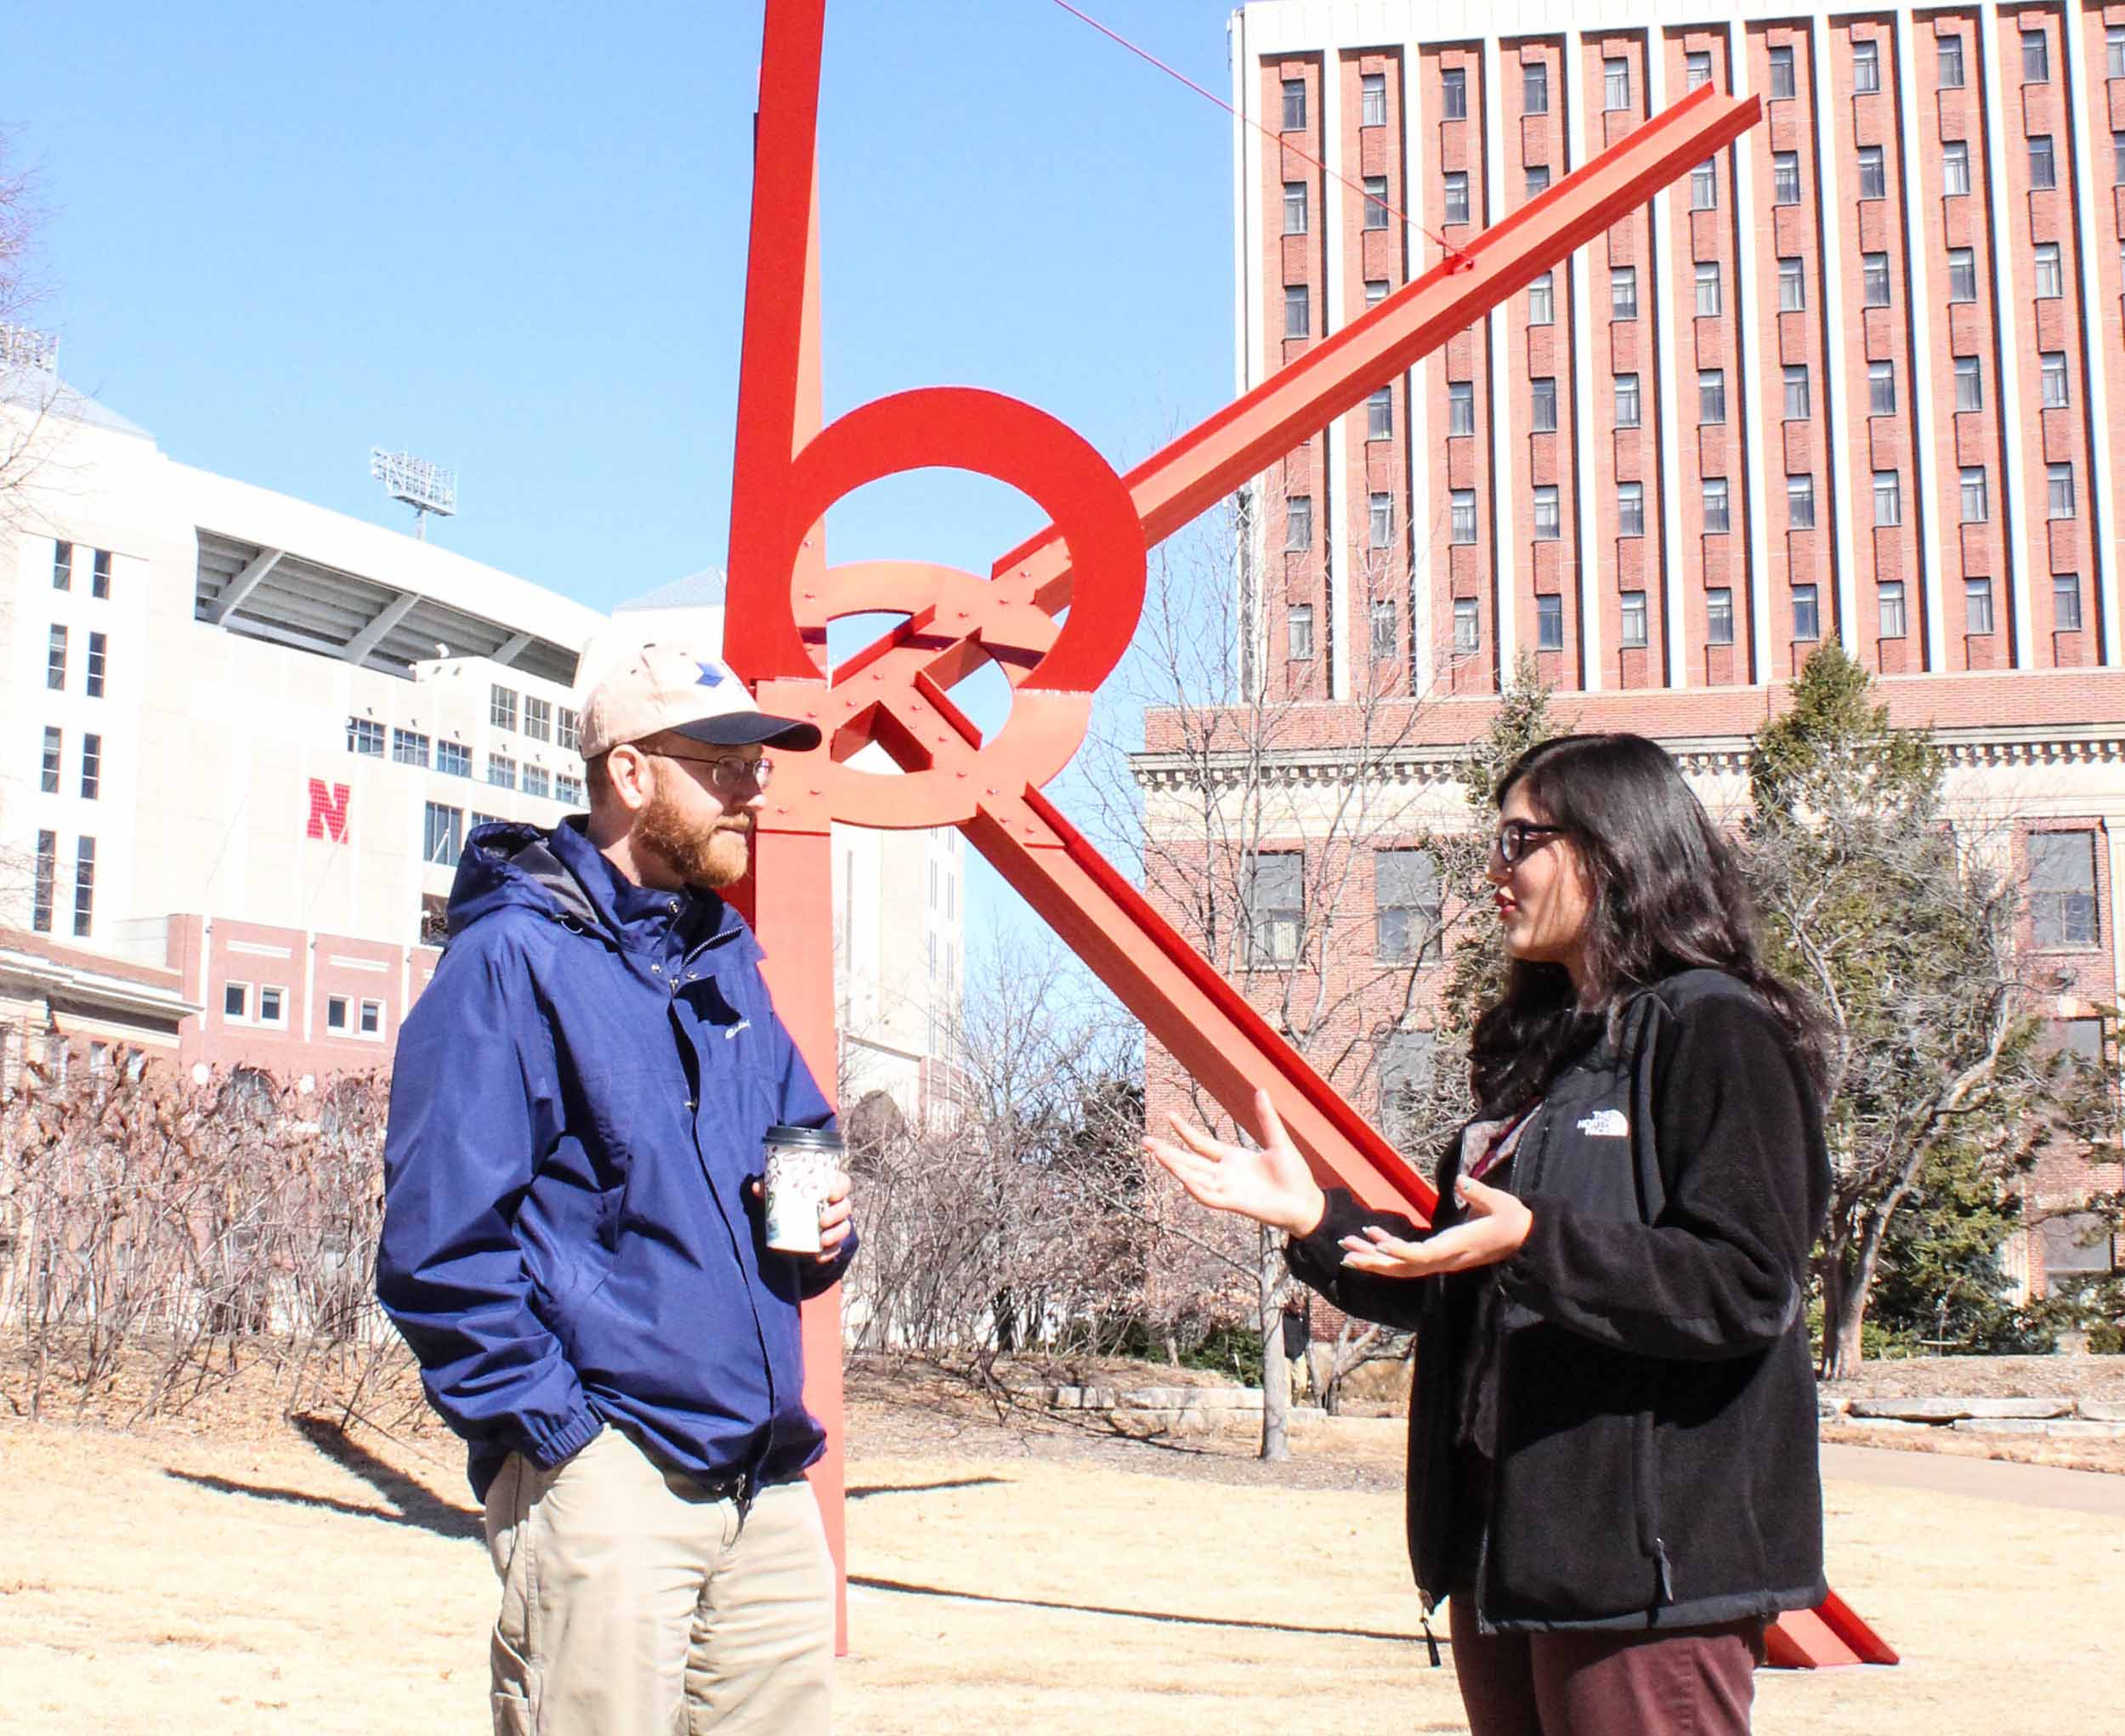 Adrian Wisnicki and Ashanka Kumari on the grounds of the University of Nebraska-Lincoln, 2014. Copyright Angela Aliff. Creative Commons Attribution-NonCommercial 3.0 Unported (https://creativecommons.org/licenses/by-nc/3.0/).